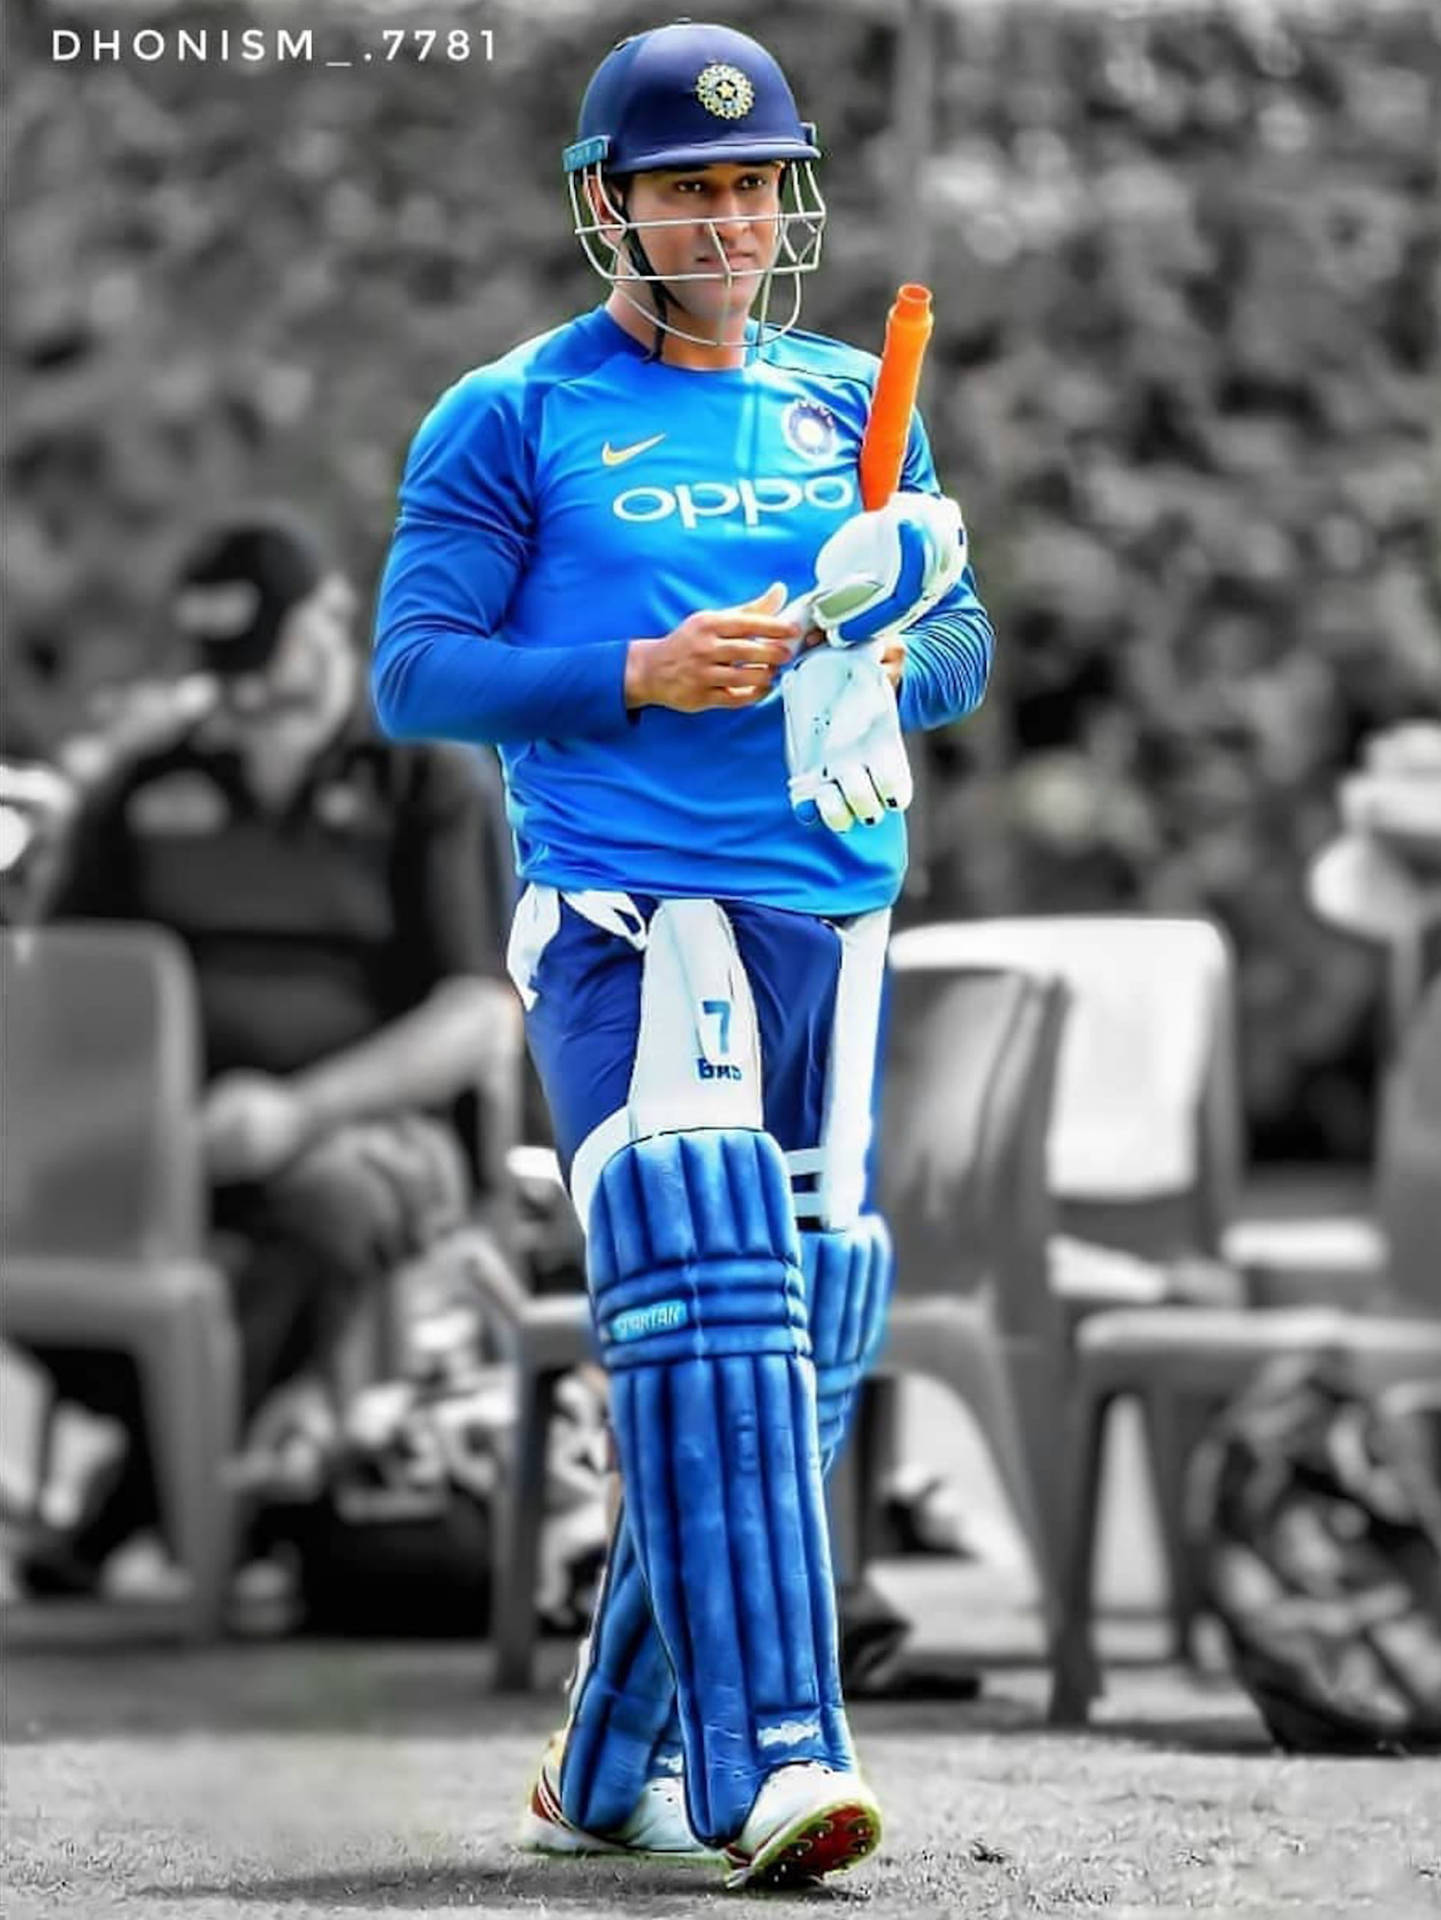 Msd On An Oppo Uniform Background